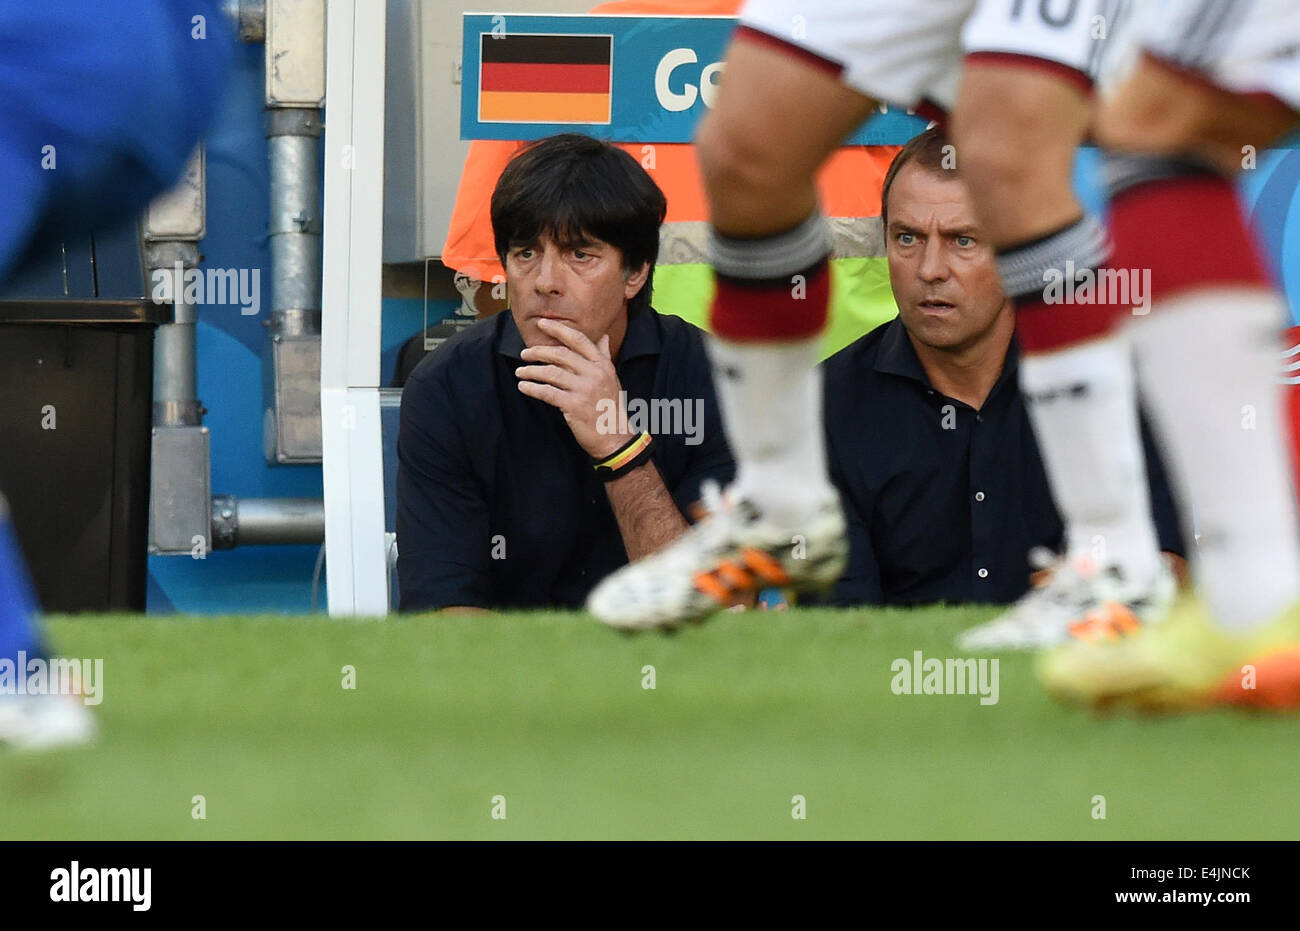 Rio de Janeiro, Brazil. 13th July, 2014. Head coach Joachim Loew (L) and assistant coach Hansi Flick of Germany sit on the bench during the FIFA World Cup 2014 final soccer match between Germany and Argentina at the Estadio do Maracana in Rio de Janeiro, Brazil, 13 July 2014. Photo: Marcus Brandt/dpa/Alamy Live News Stock Photo